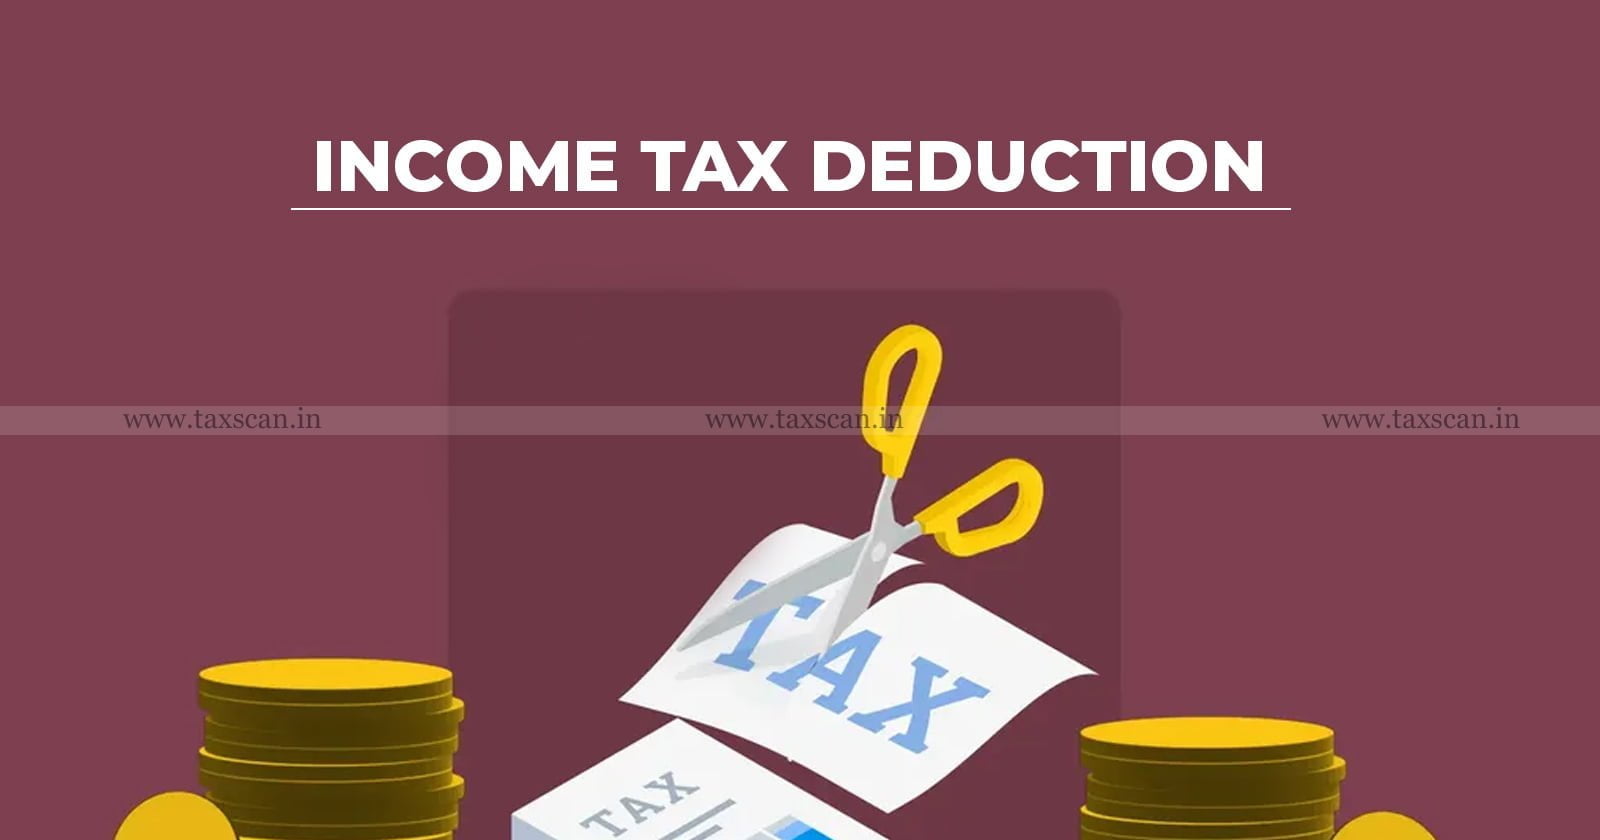 Income Tax Deduction - Income Tax - Deduction - Return filed - IT Act - Income Tax Act - ITAT - Taxscan